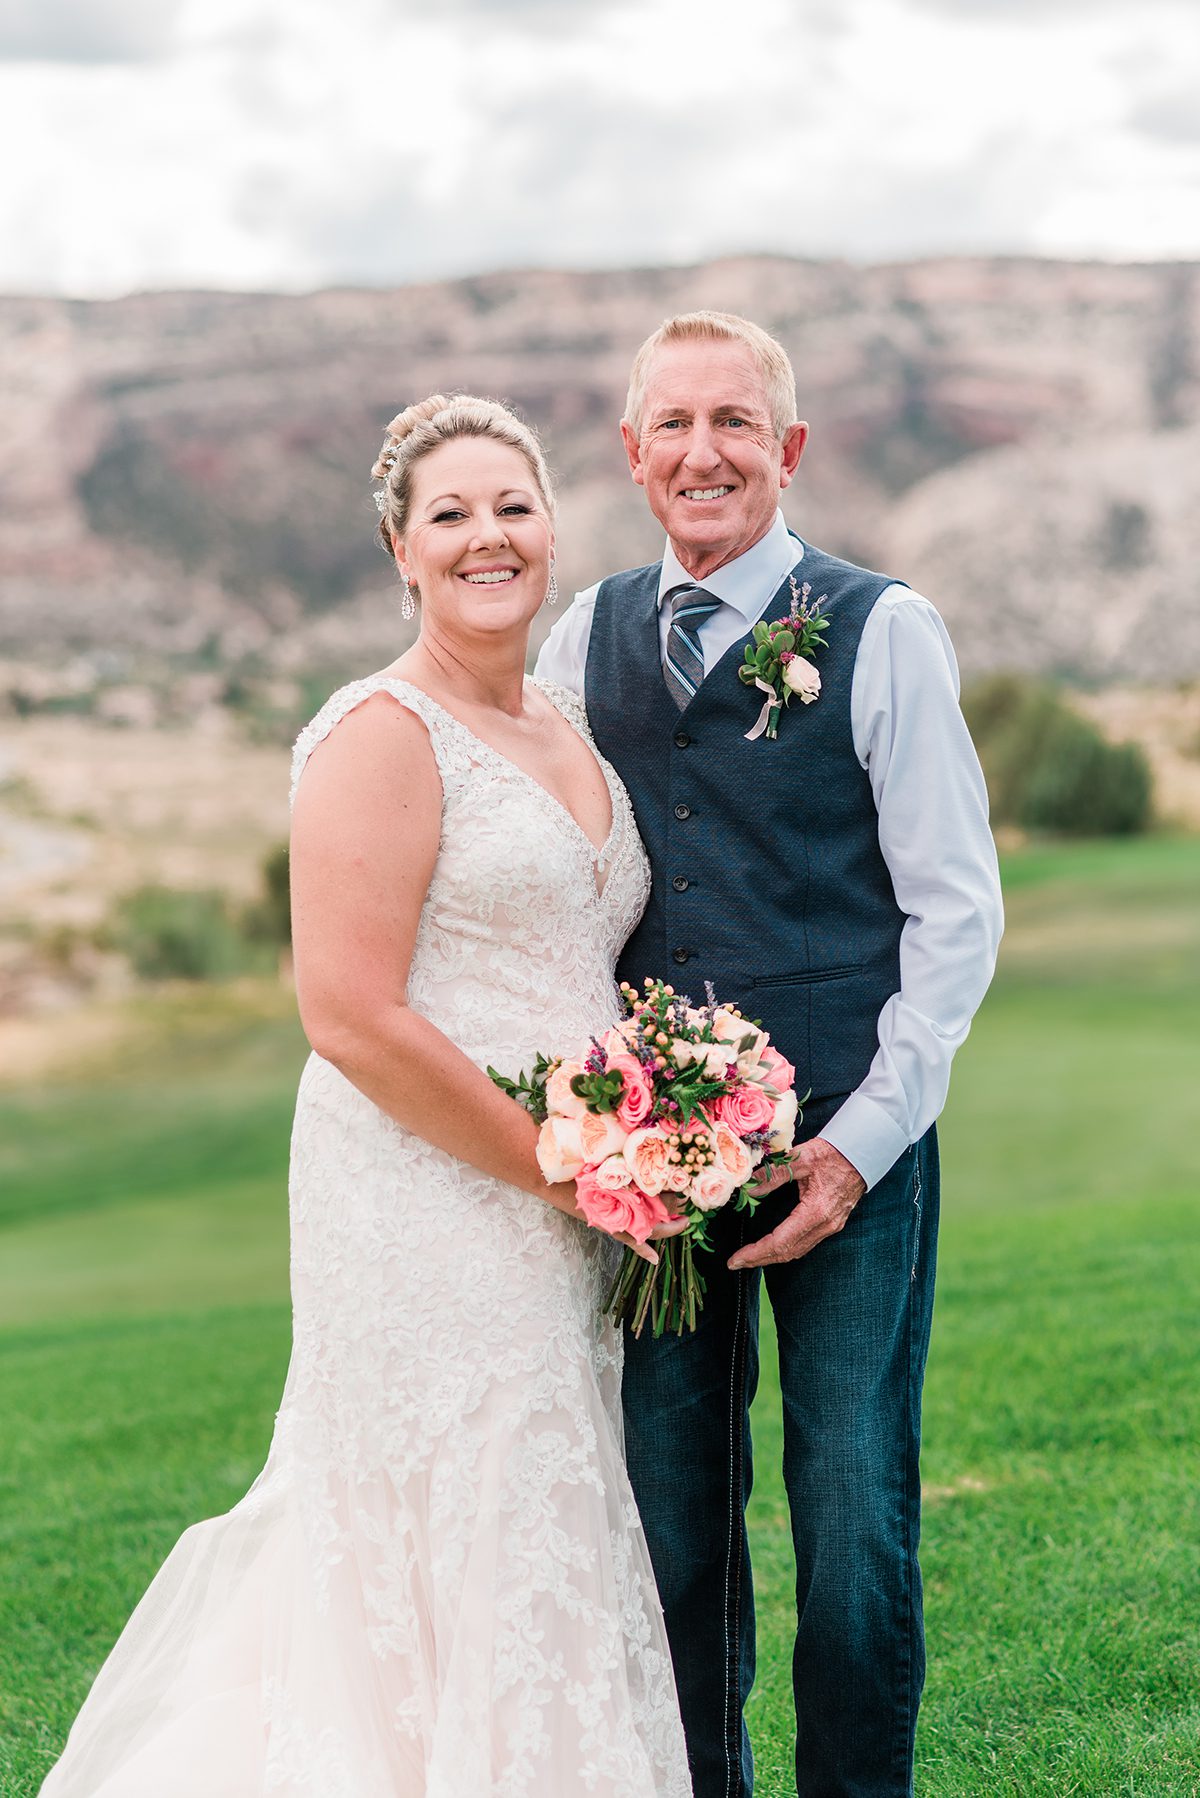 Bride and groom at the Redlands Mesa golf course